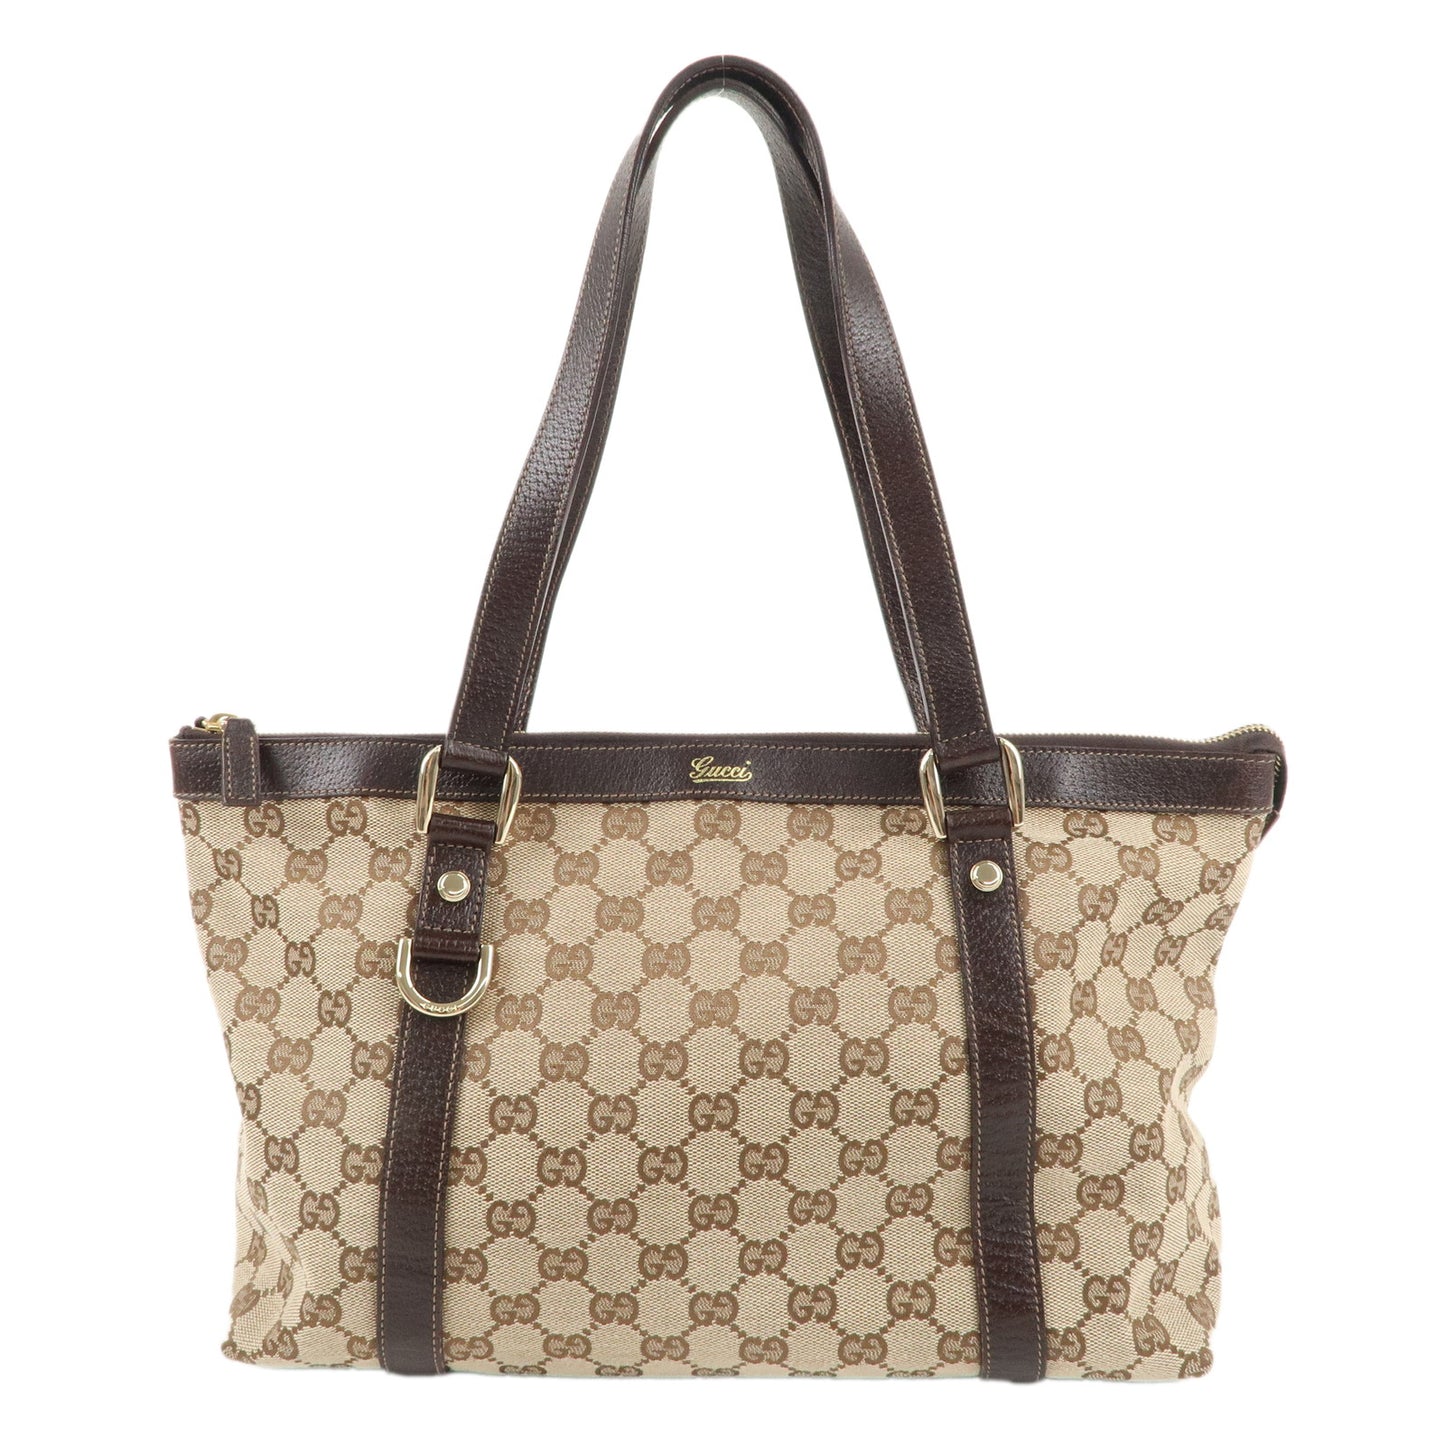 GUCCI-Abbey-GG-Canvas-Leather-Tote-Bag-Beige-Brown-141470